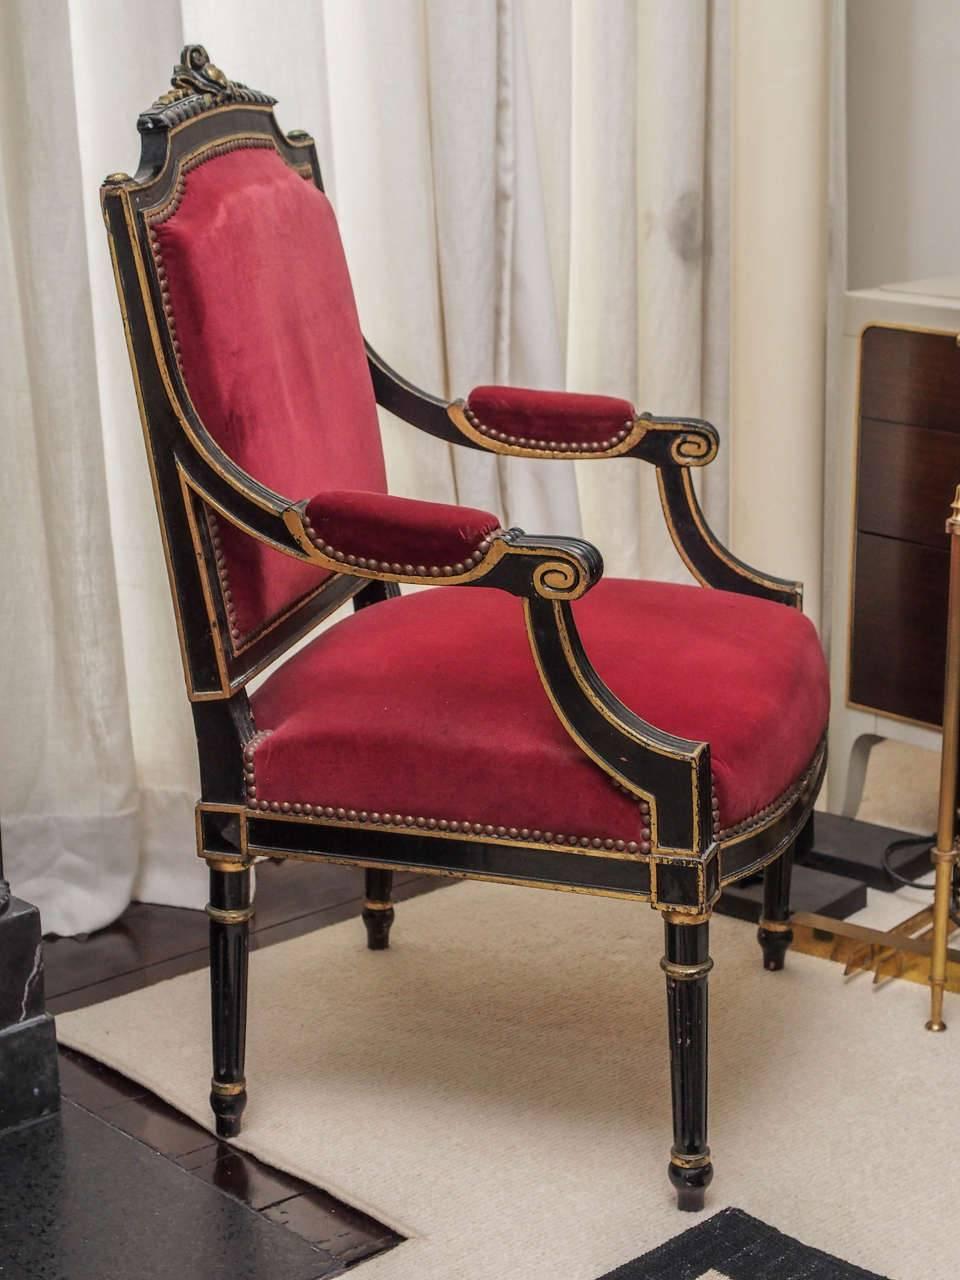 Elegant and timeless pair of ebonized (black) French armchairs with gilt details throughout; red velvet upholstery with brass nailheads.